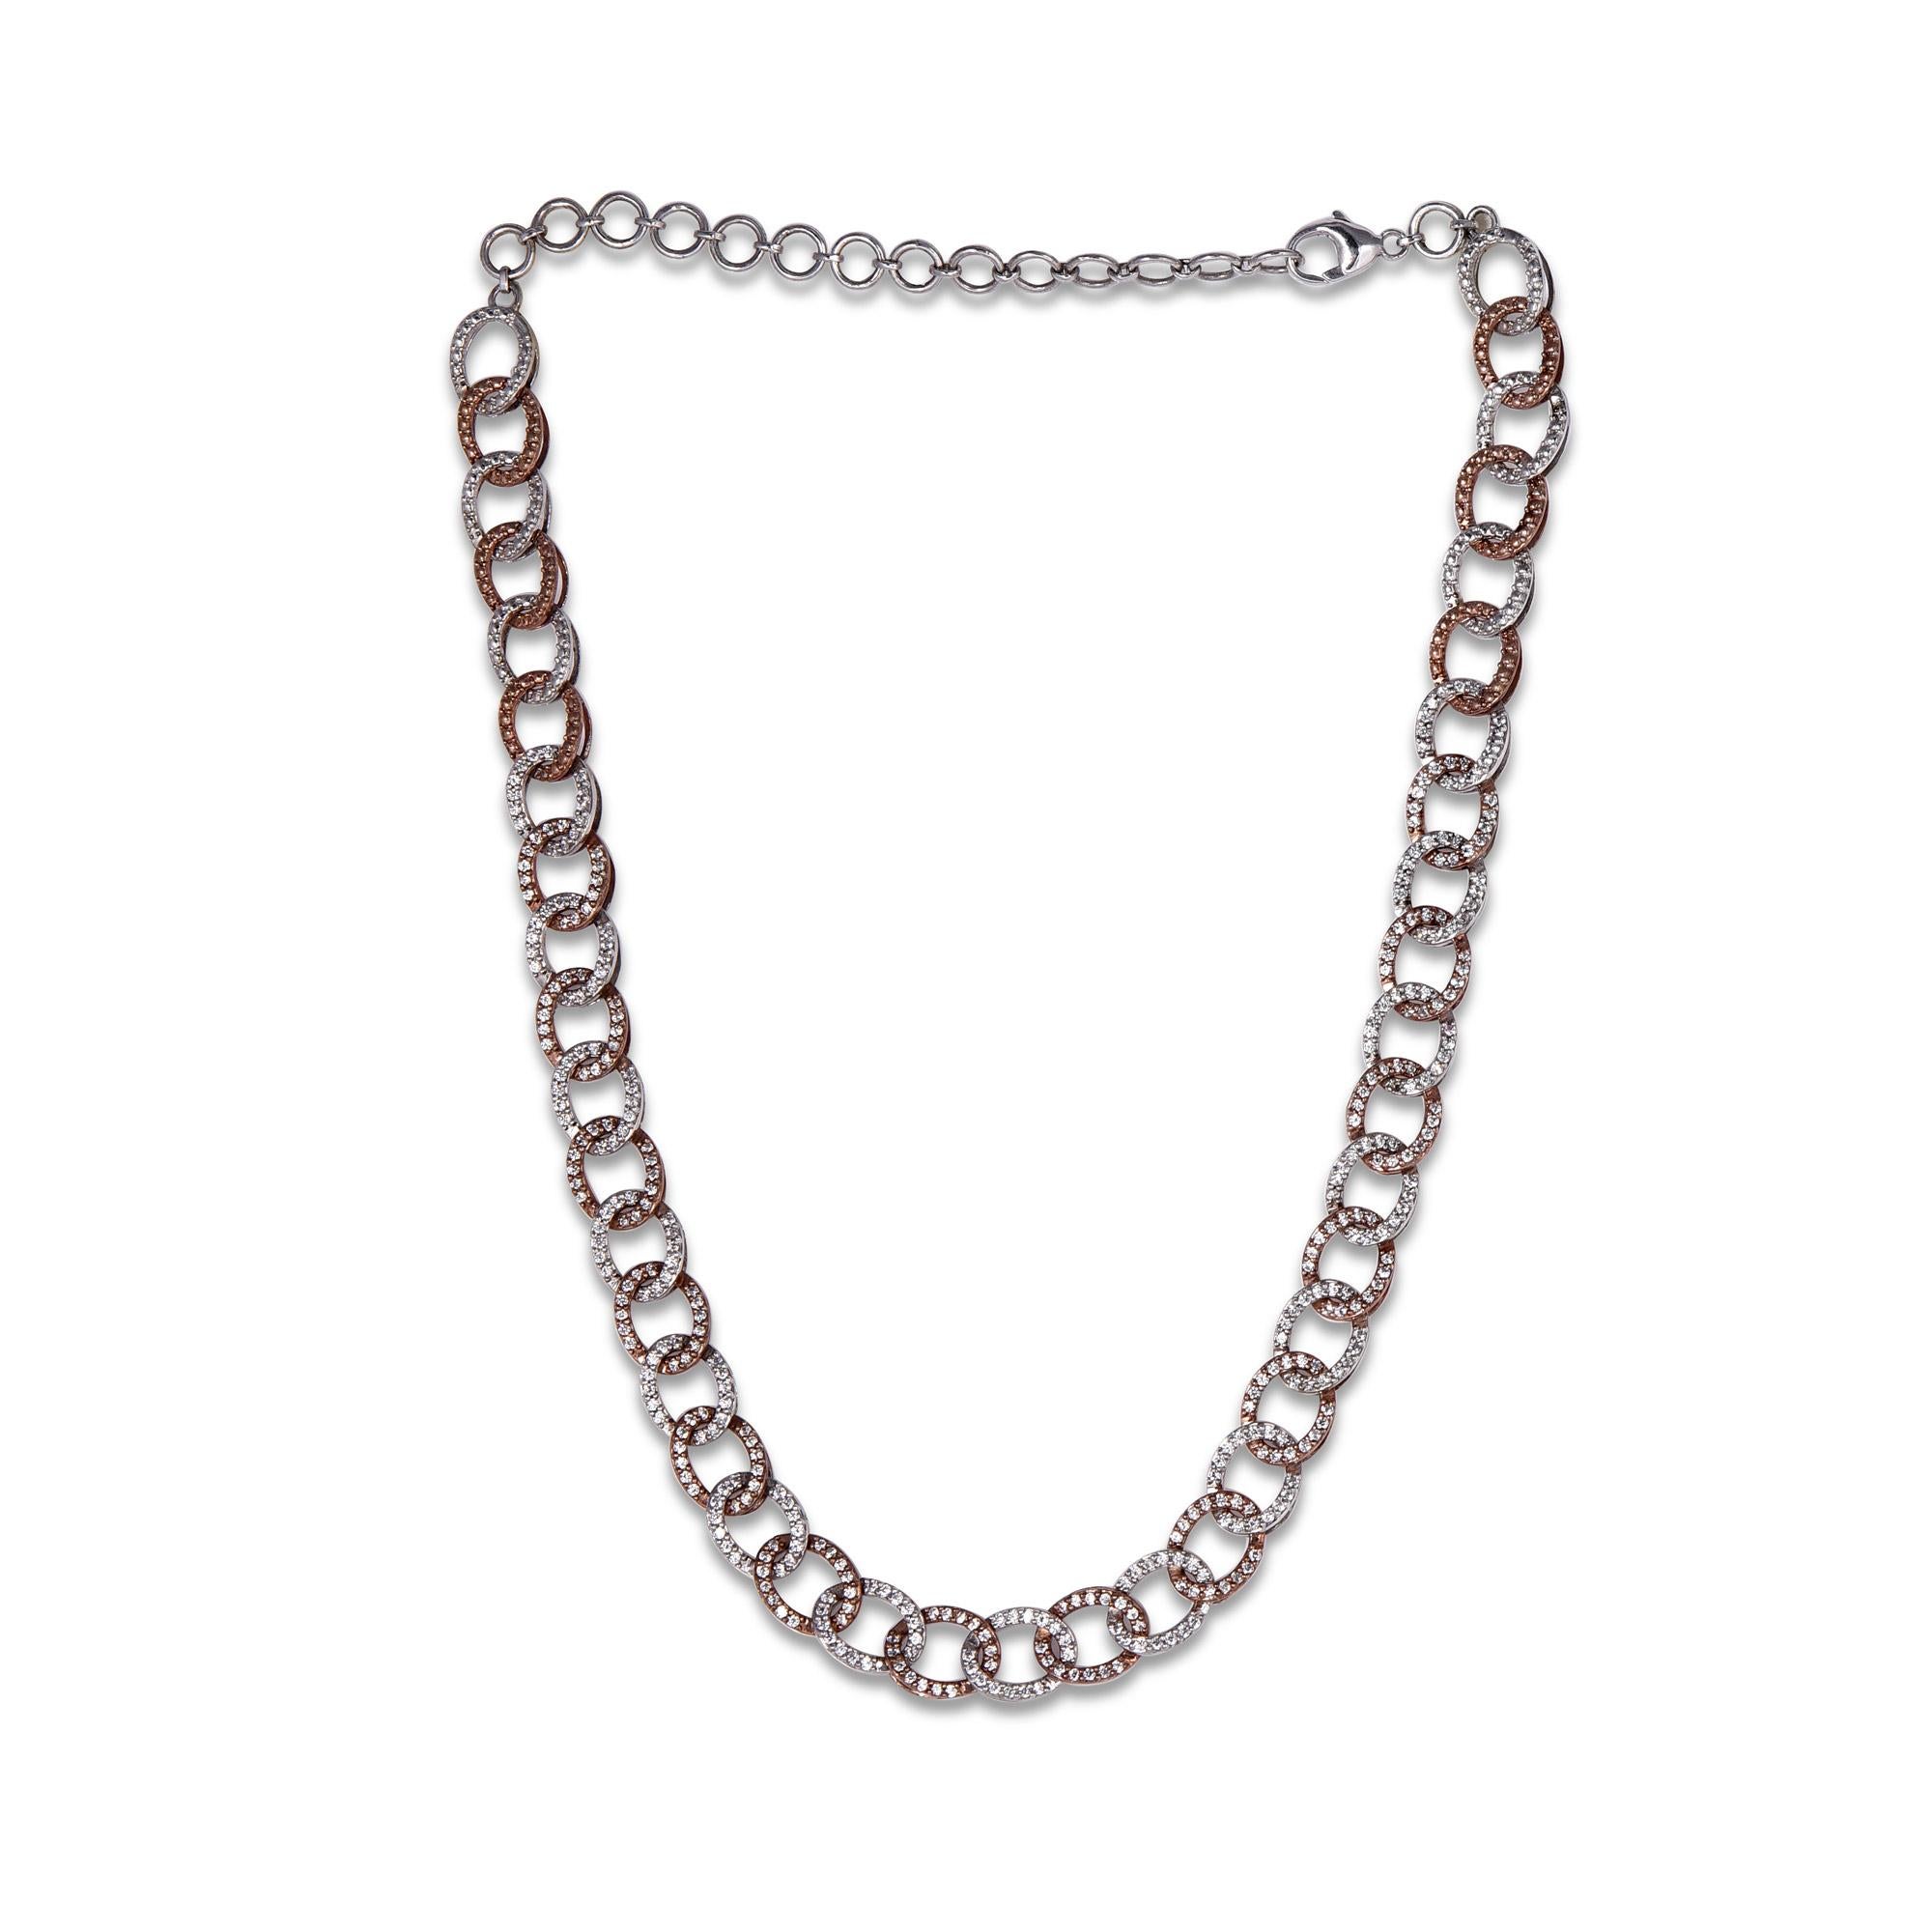 Truly exquisite, she'll admire the effortless look of this graceful diamond necklace. The necklace is crafted from 18-karat White gold and features Round Brilliant 406 white diamonds set in Prong setting, H-I color I1 clarity and a high polish